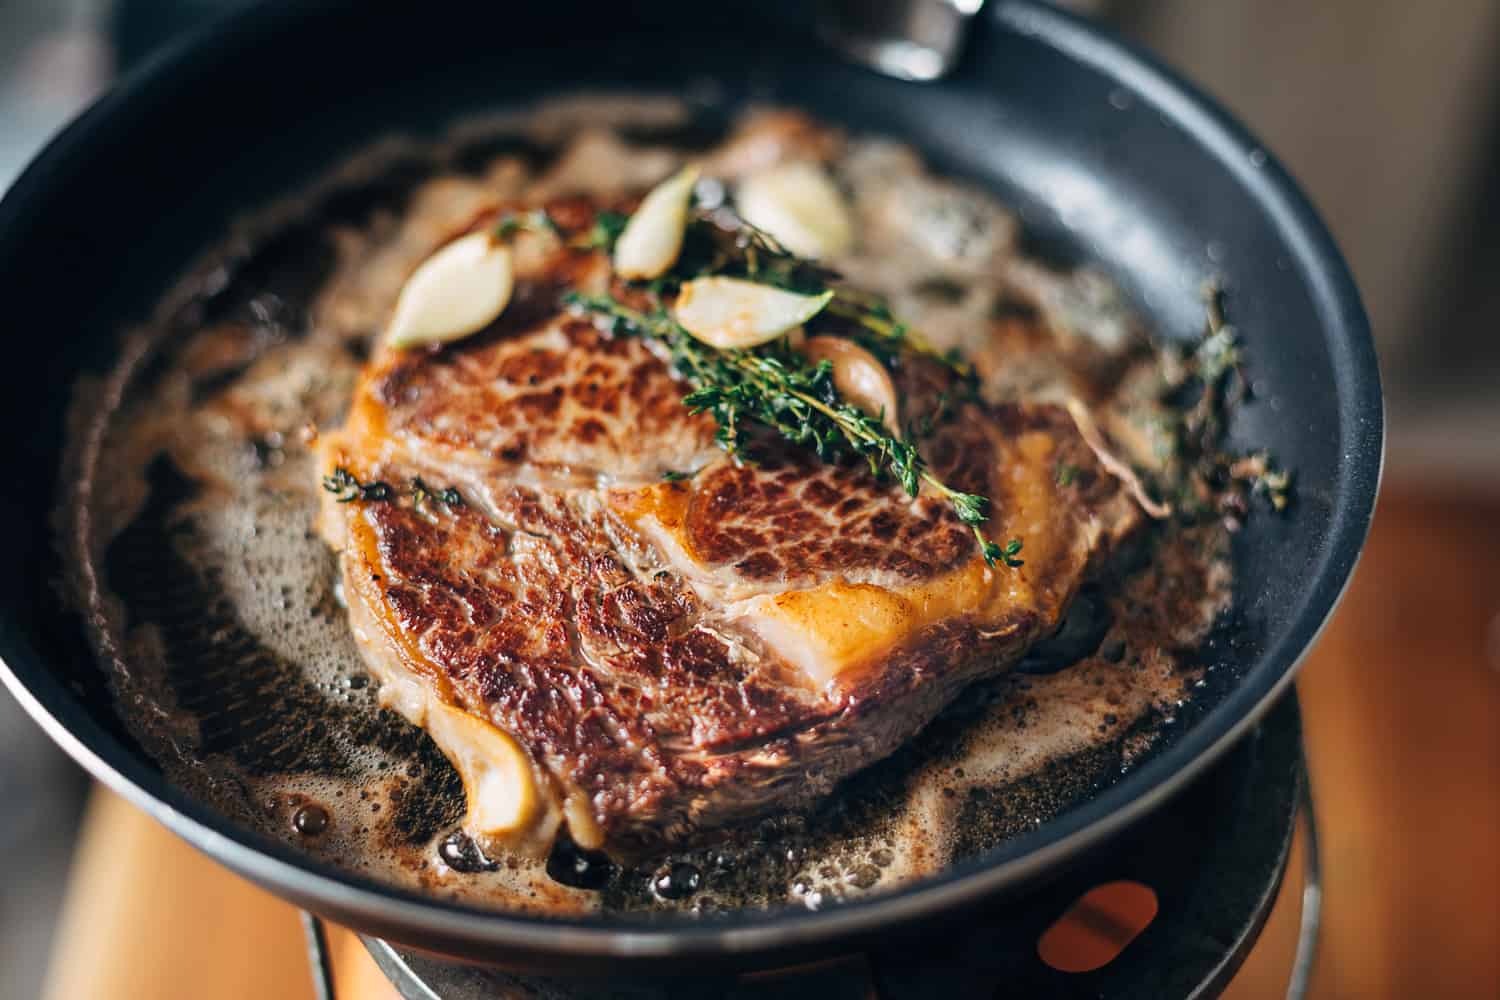 Ribeye steak with butter, thyme, and garlic on hot cast iron pan